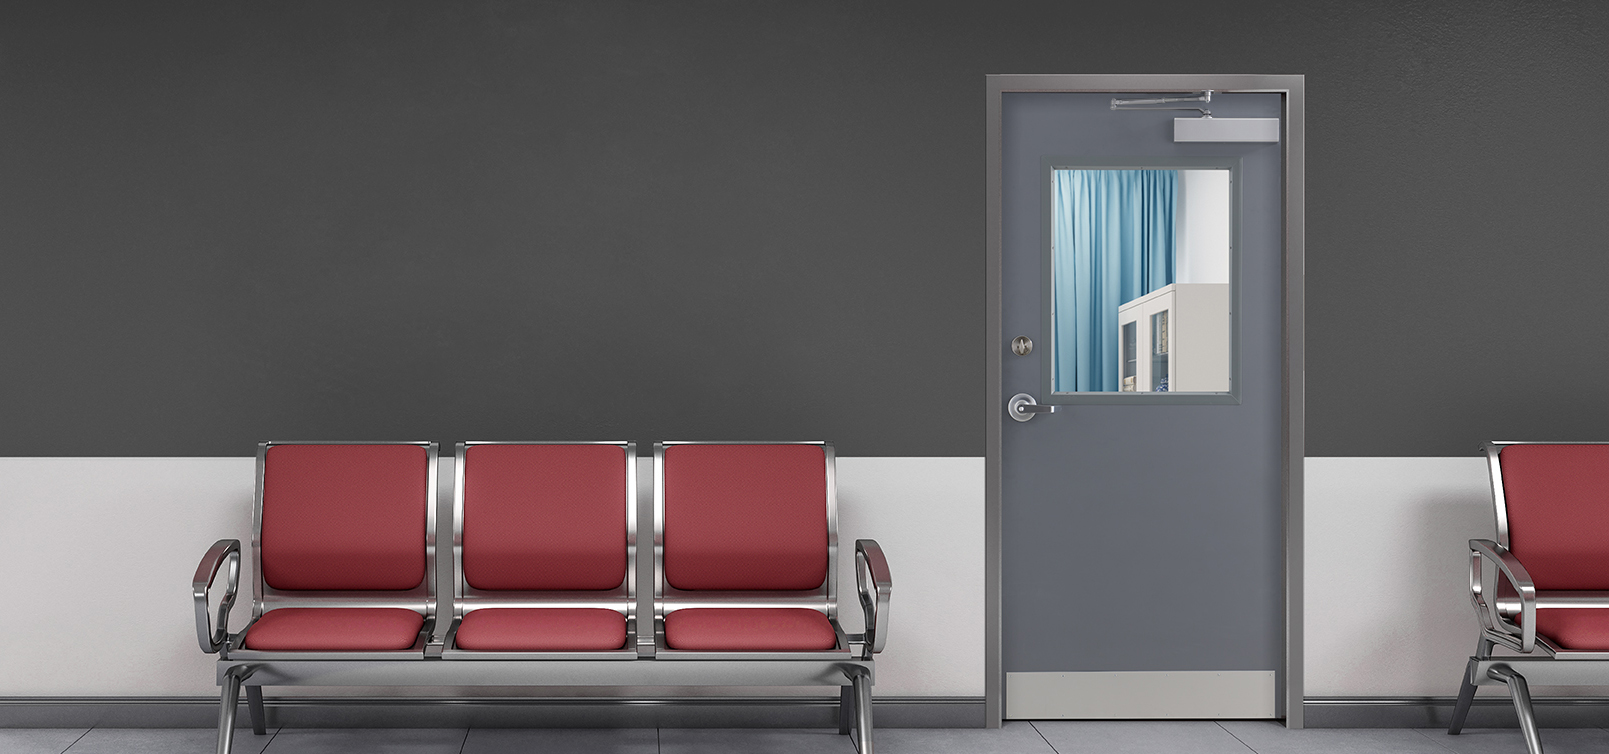 Waiting room with Tell heavy duty commercial door and lockset